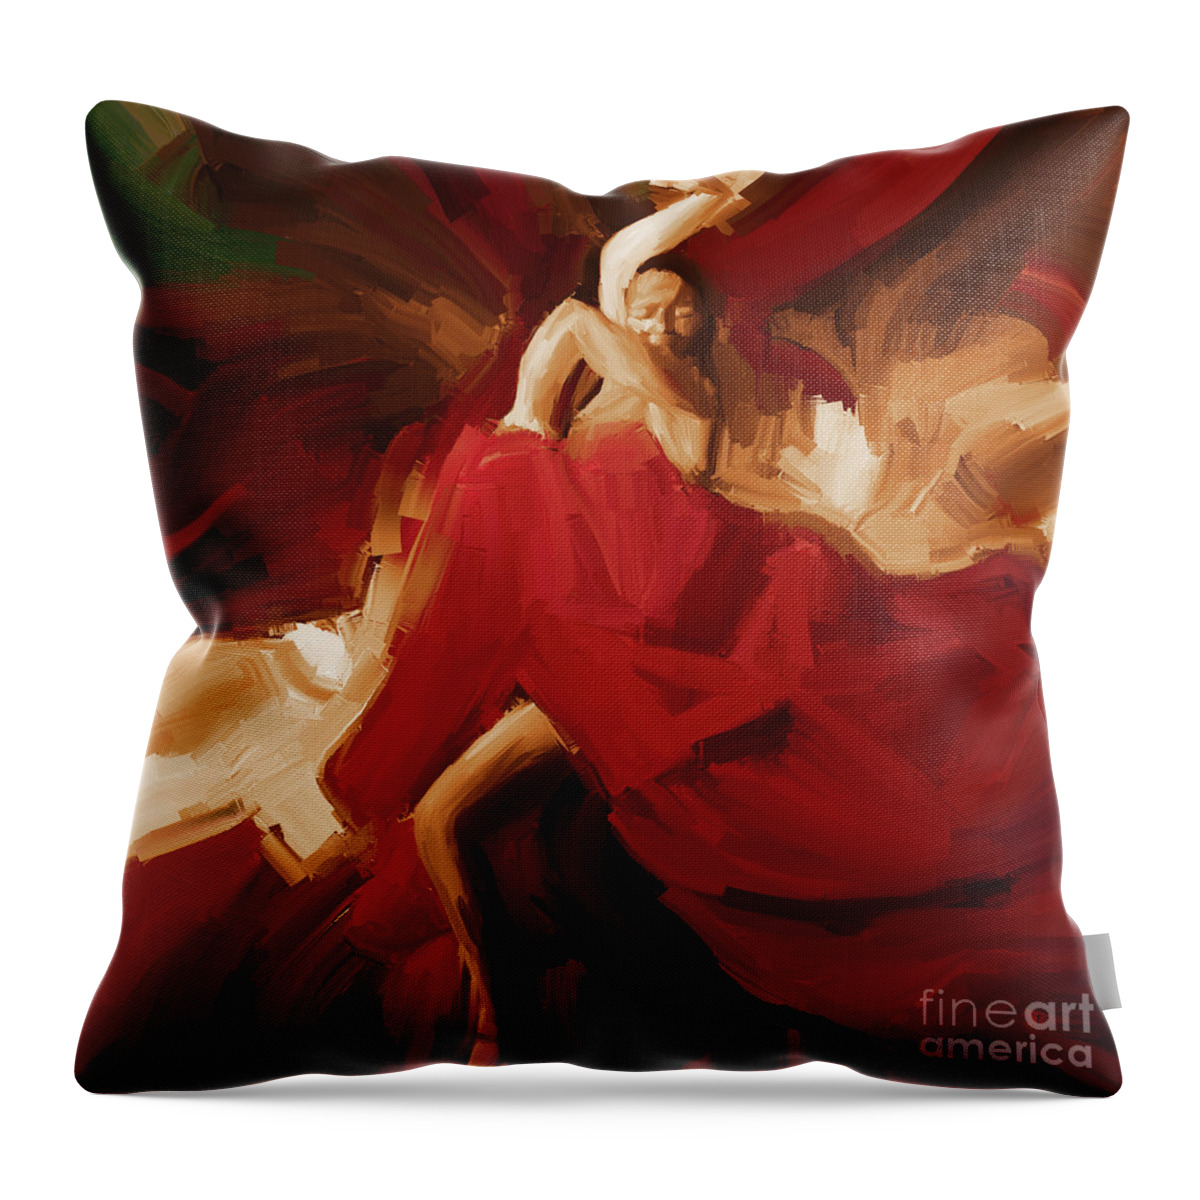 Jazz Throw Pillow featuring the painting Flamenco Spanish Dance Painting 01 by Gull G